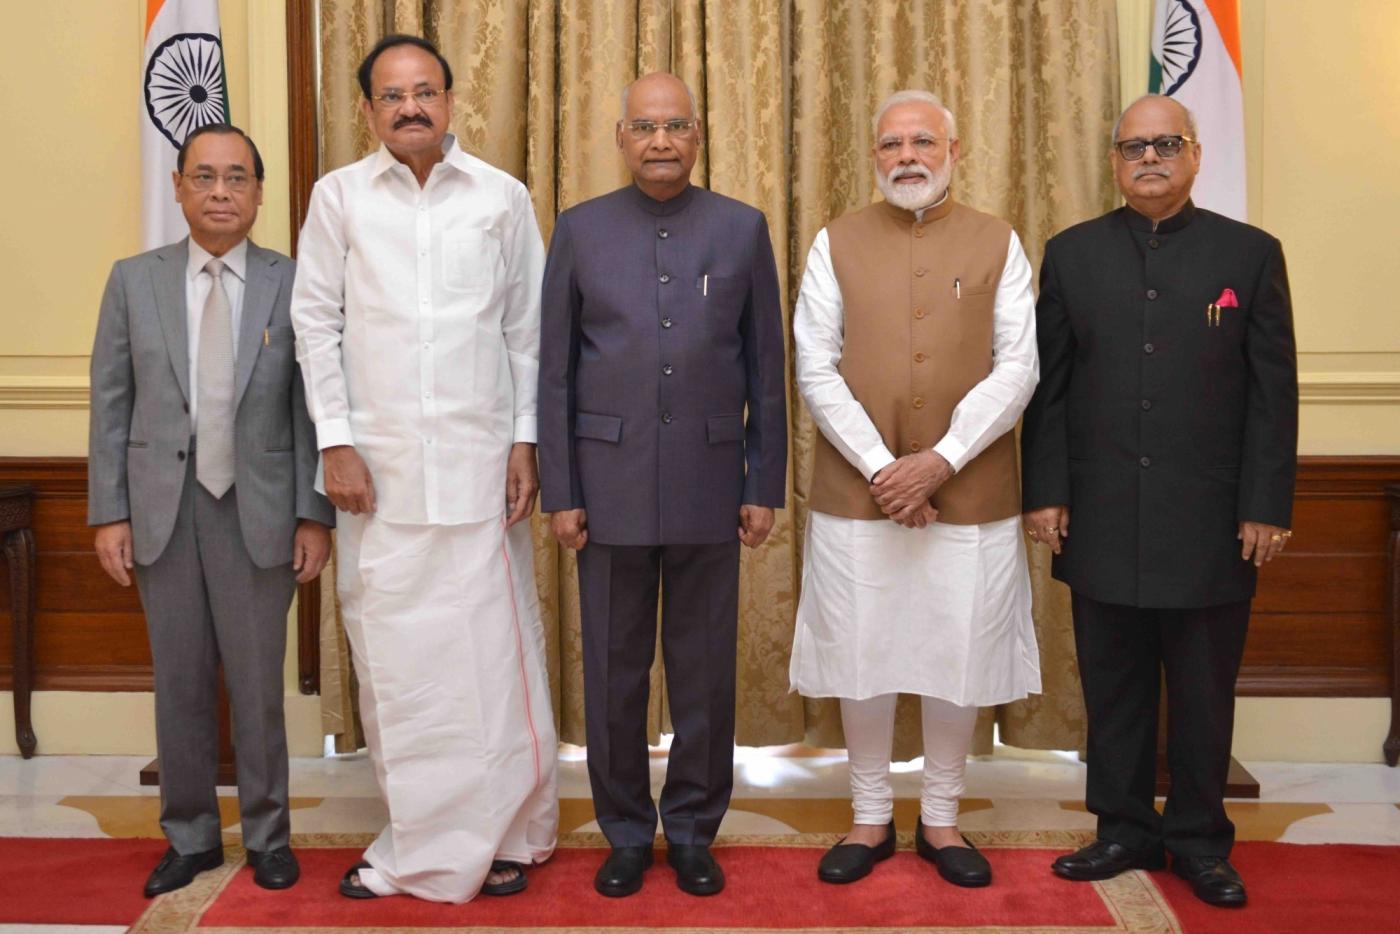 New Delhi: President Ram Nath Kovind, with Vice President M. Venkaiah Naidu, Prime Minister Narendra Modi and Chief Justice of India Ranjan Gogoi during the swearing-in-ceremony of Justice Pinaki Chandra Ghose, as the first Lokpal of India at Rashtrapati Bhavan on March 23, 2019. (Photo IANS/RB) by . 